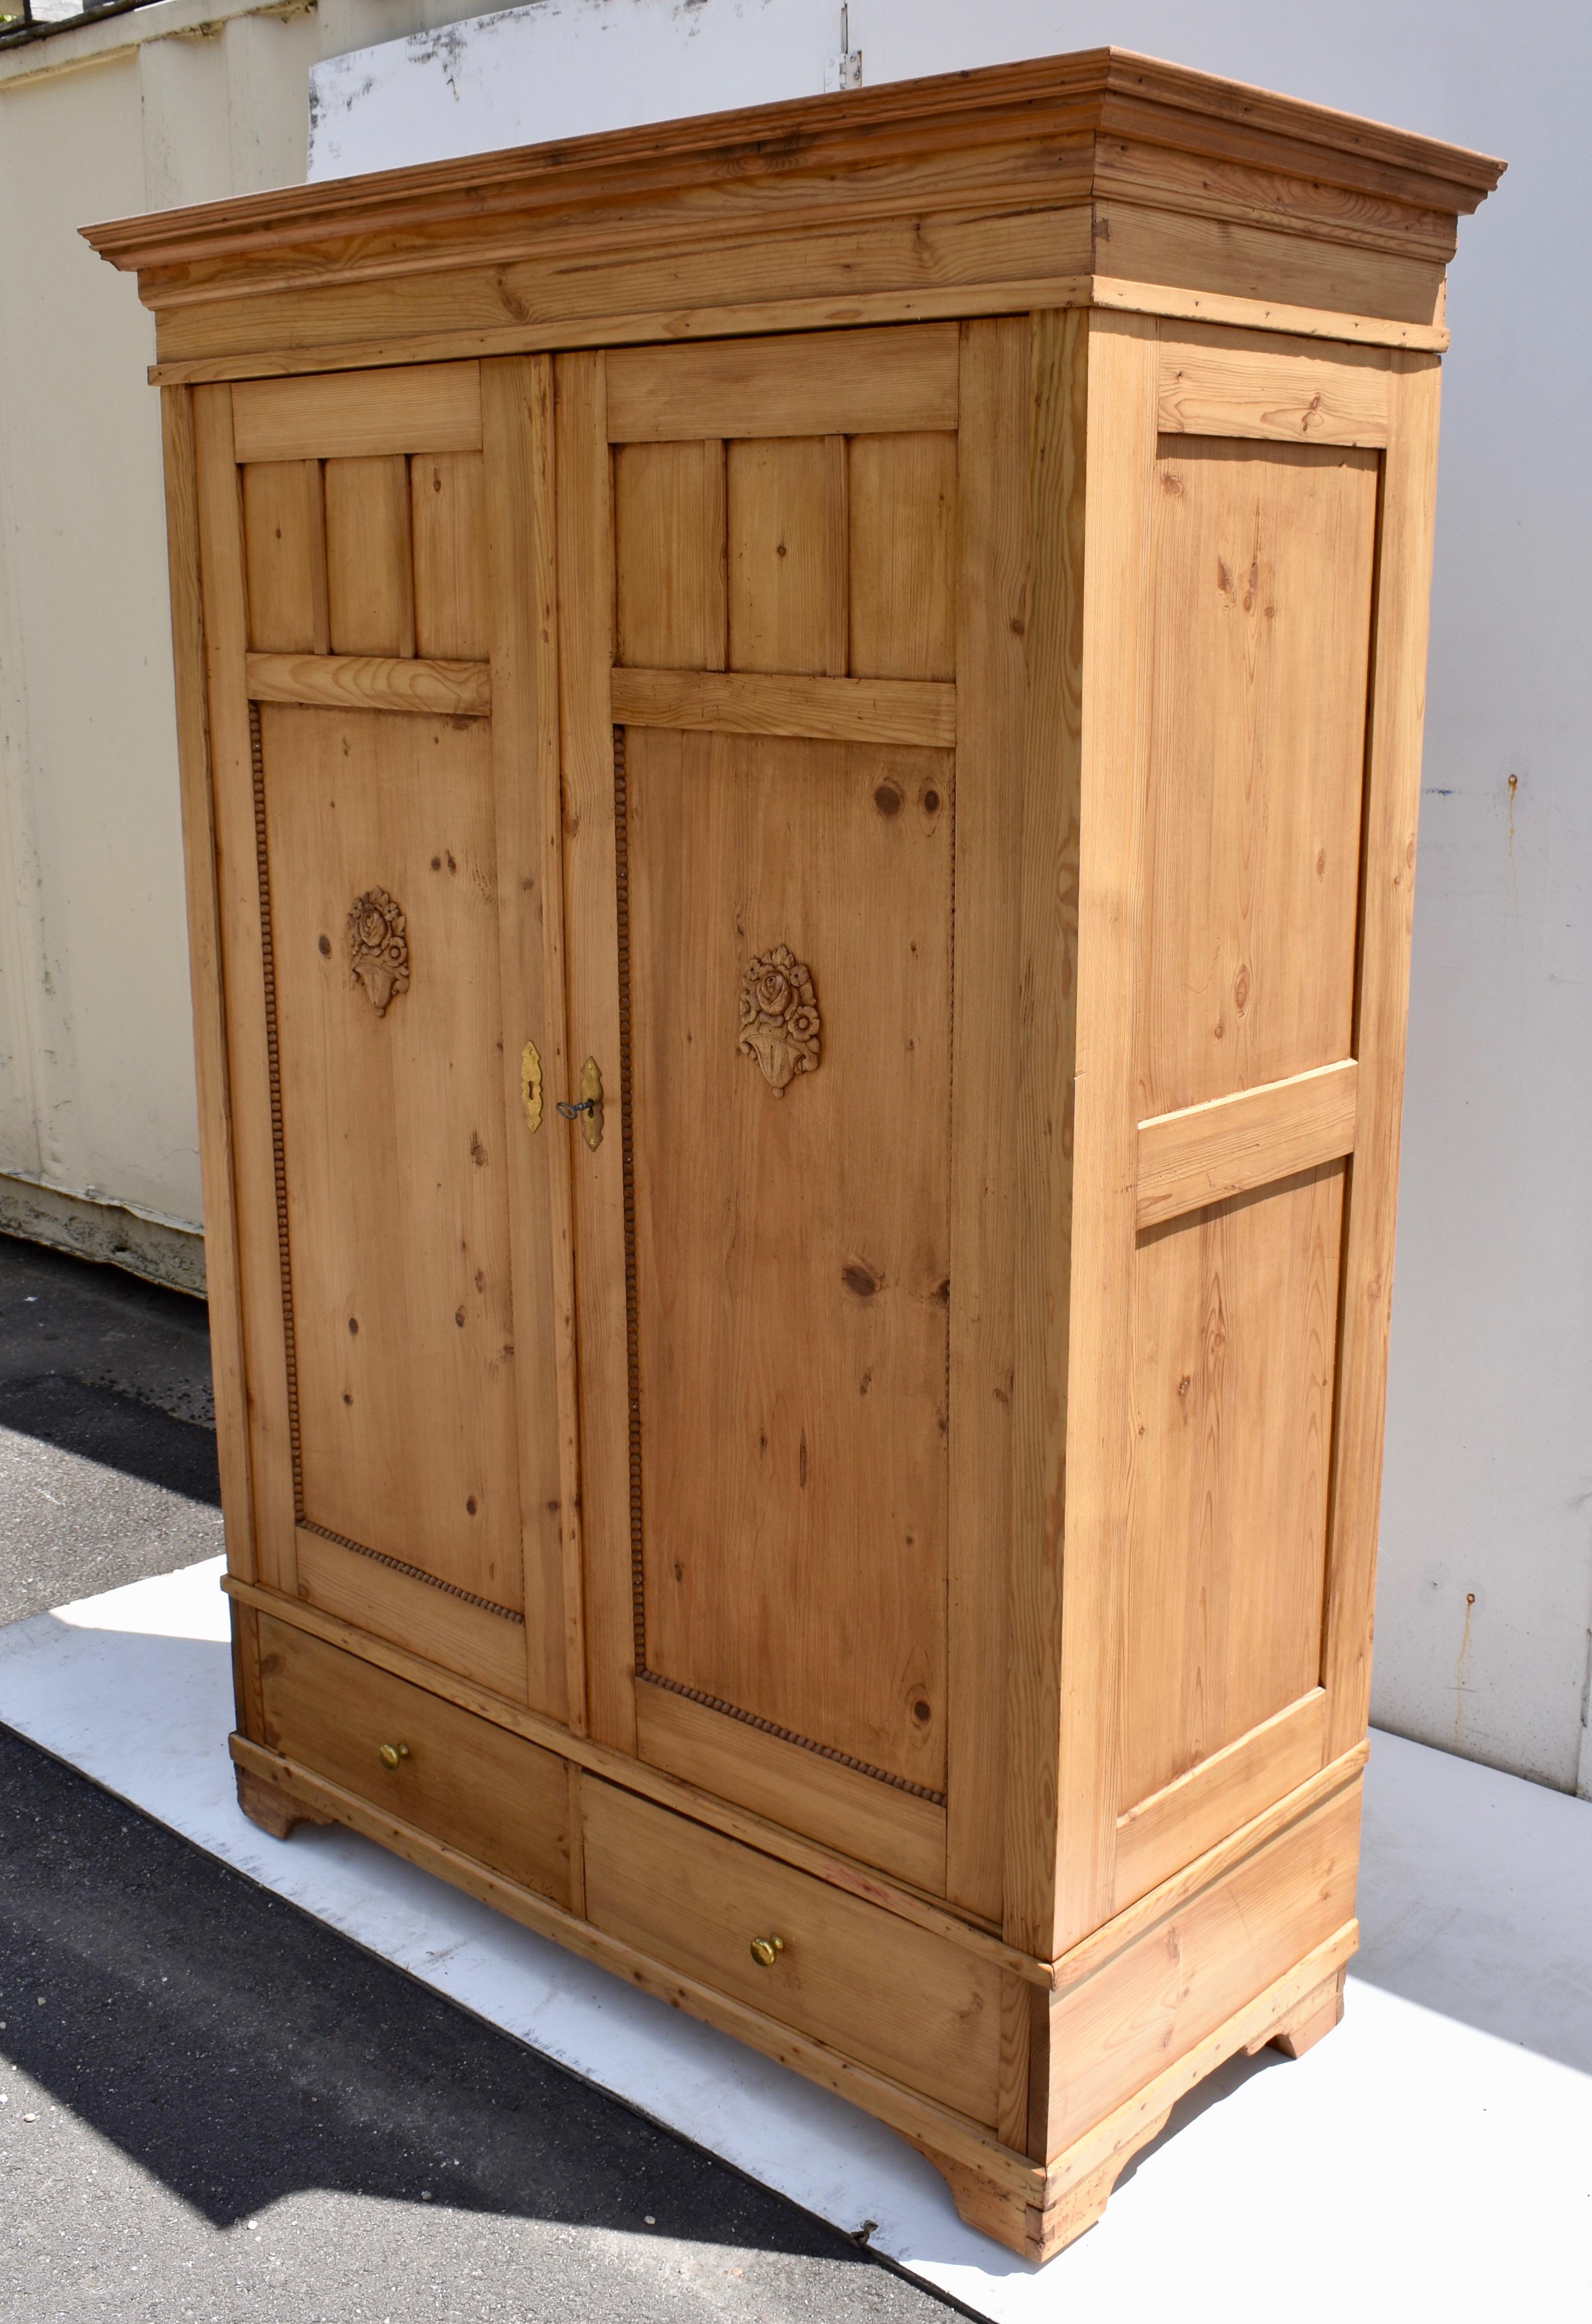 This is an excellent opportunity to purchase a large and handsome knock-down pine armoire at a very reasonable price. Beneath a bold crown molding and a shallow frieze, the two sides are each divided into two equal flat panels. The doors too are